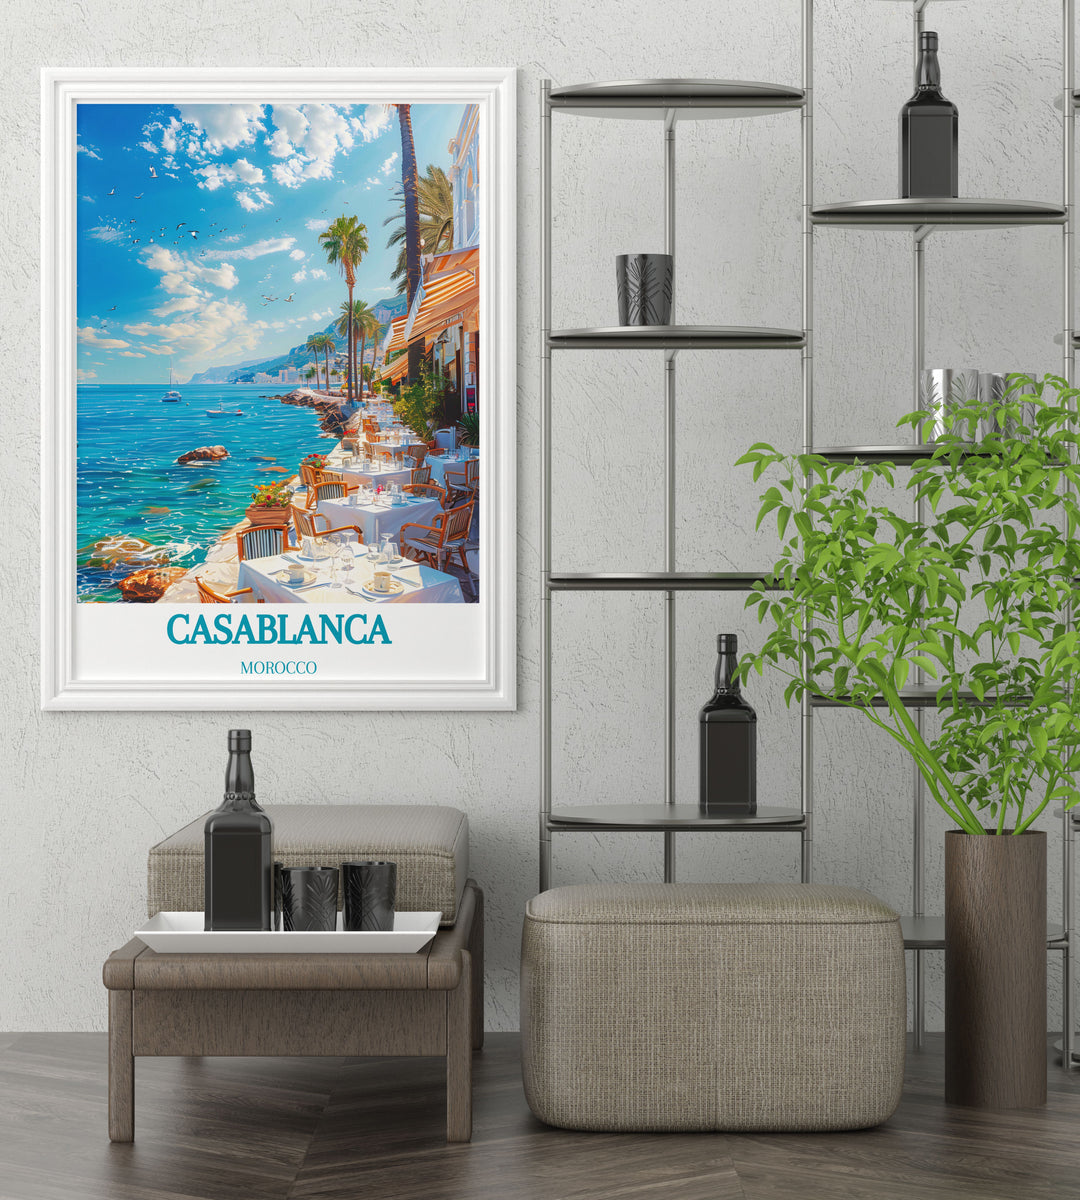 Stunning visual portrayal of Casablanca's streets, alive with color and history, captured in a high-quality art print for home decor.